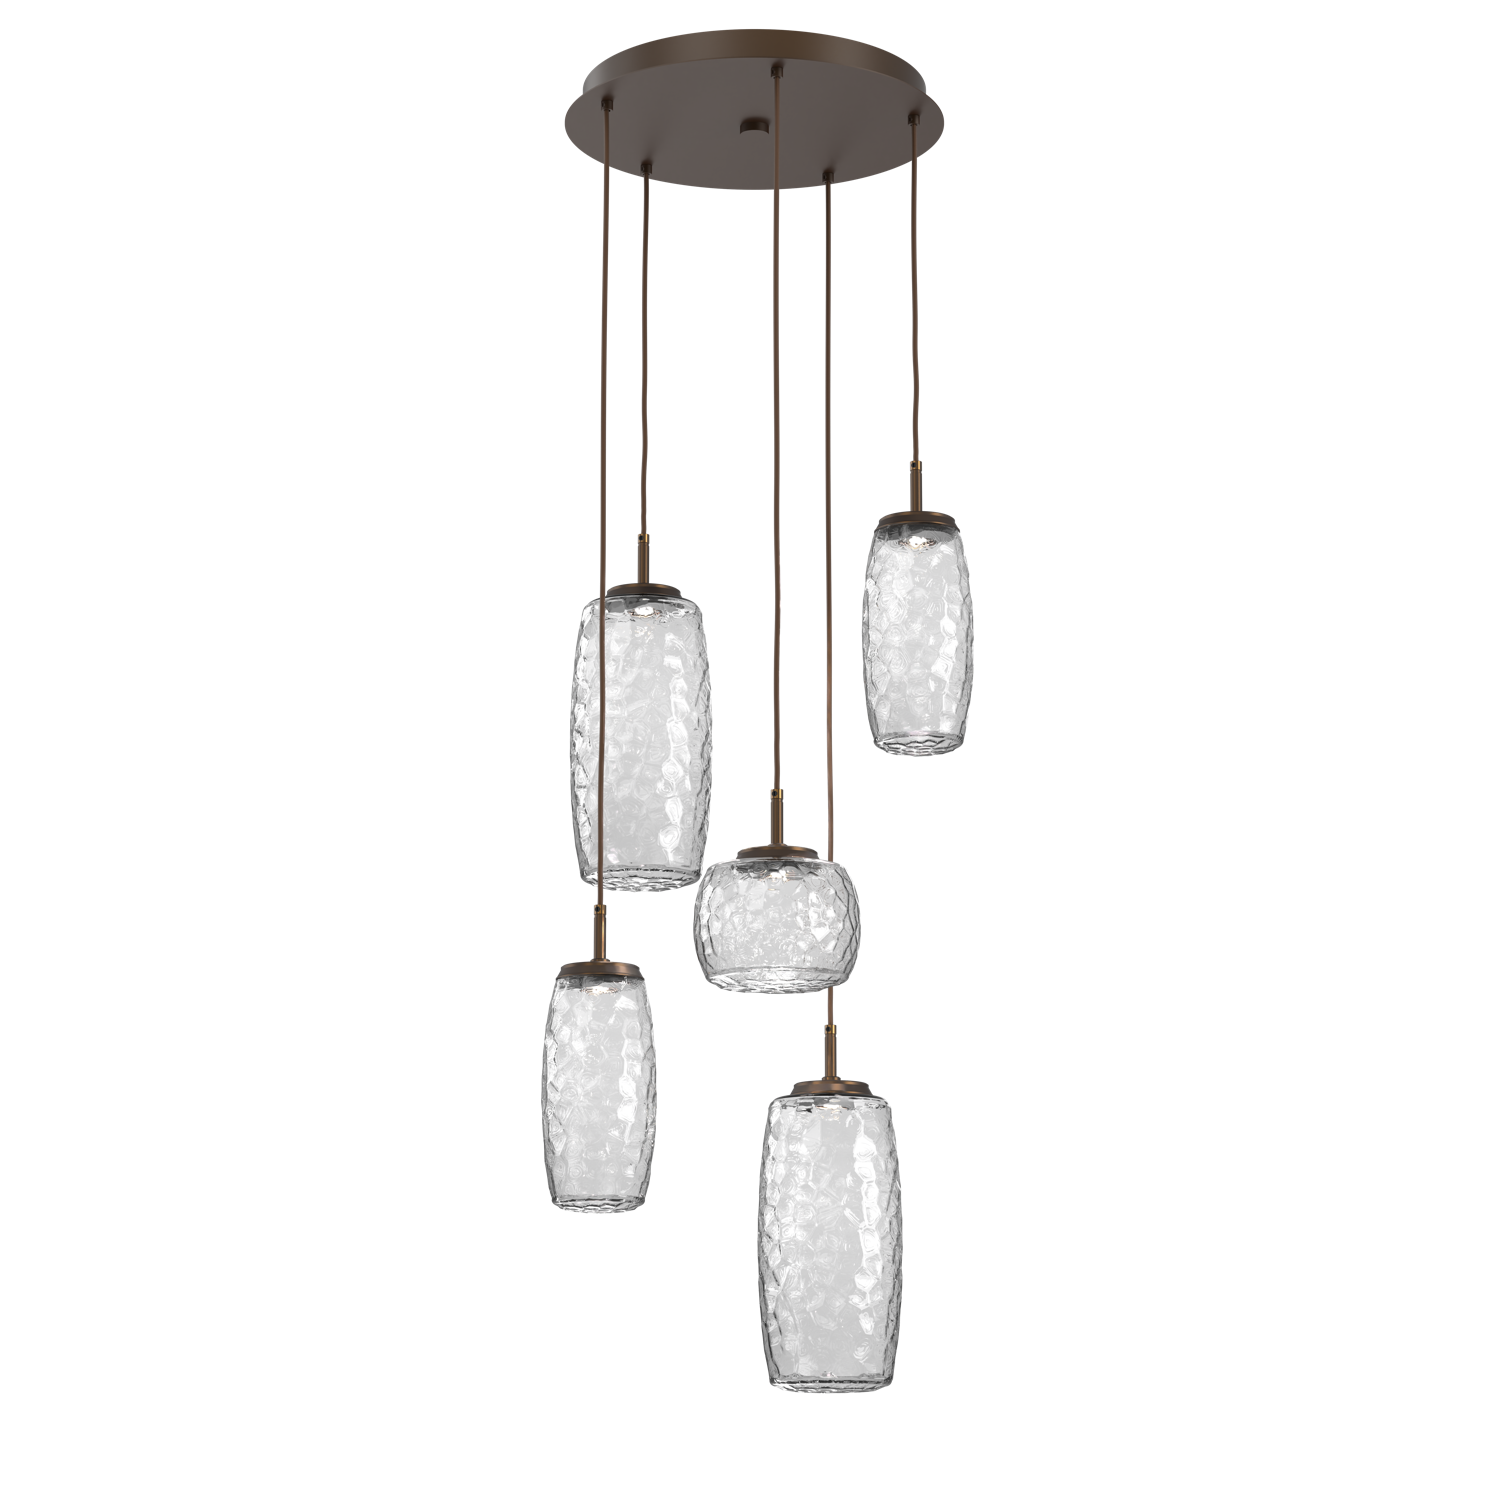 CHB0091-05-FB-C-Hammerton-Studio-Vessel-5-light-round-multi-pendant-chandelier-with-flat-bronze-finish-and-clear-blown-glass-shades-and-LED-lamping